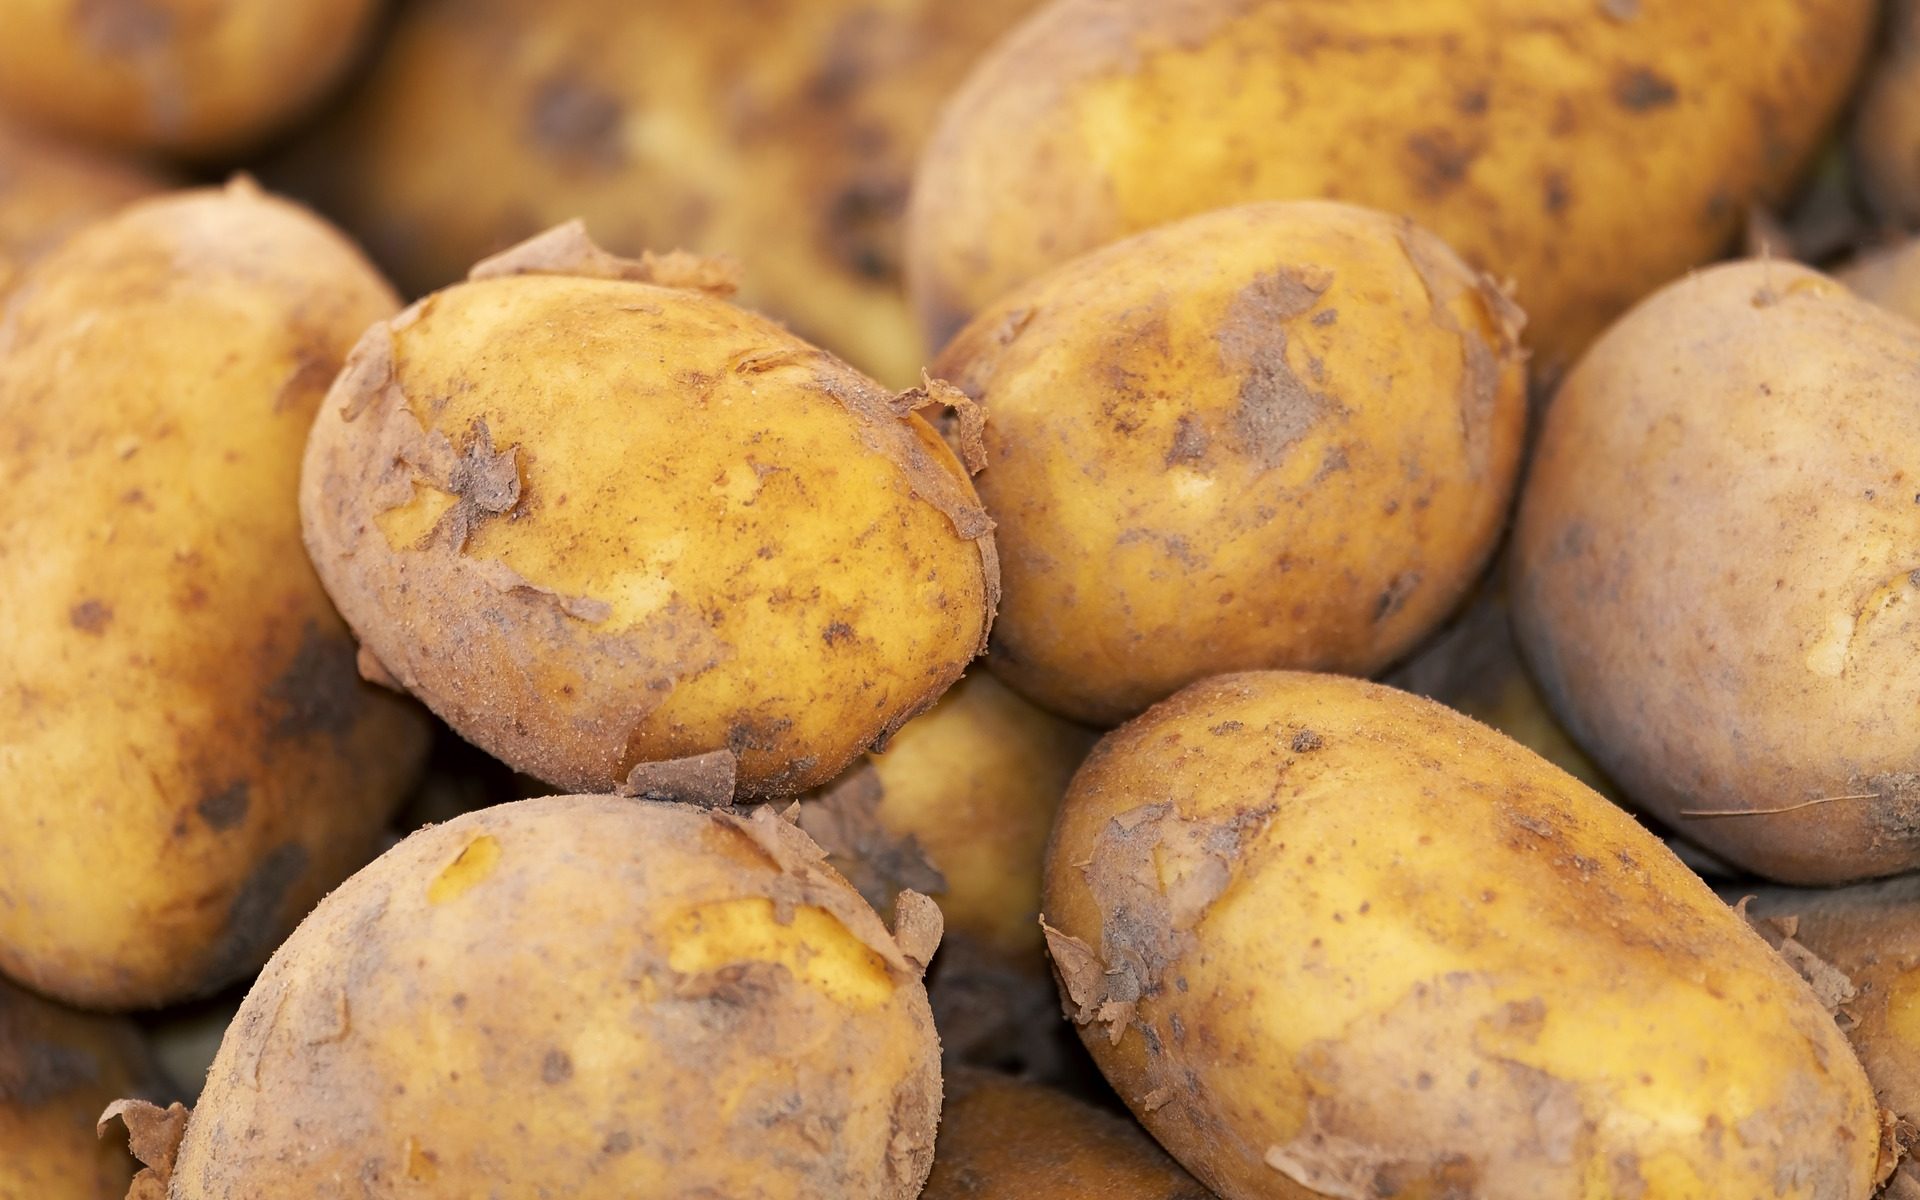 The potato – and four other ideas – as a potential brake on the effects of the coronavirus